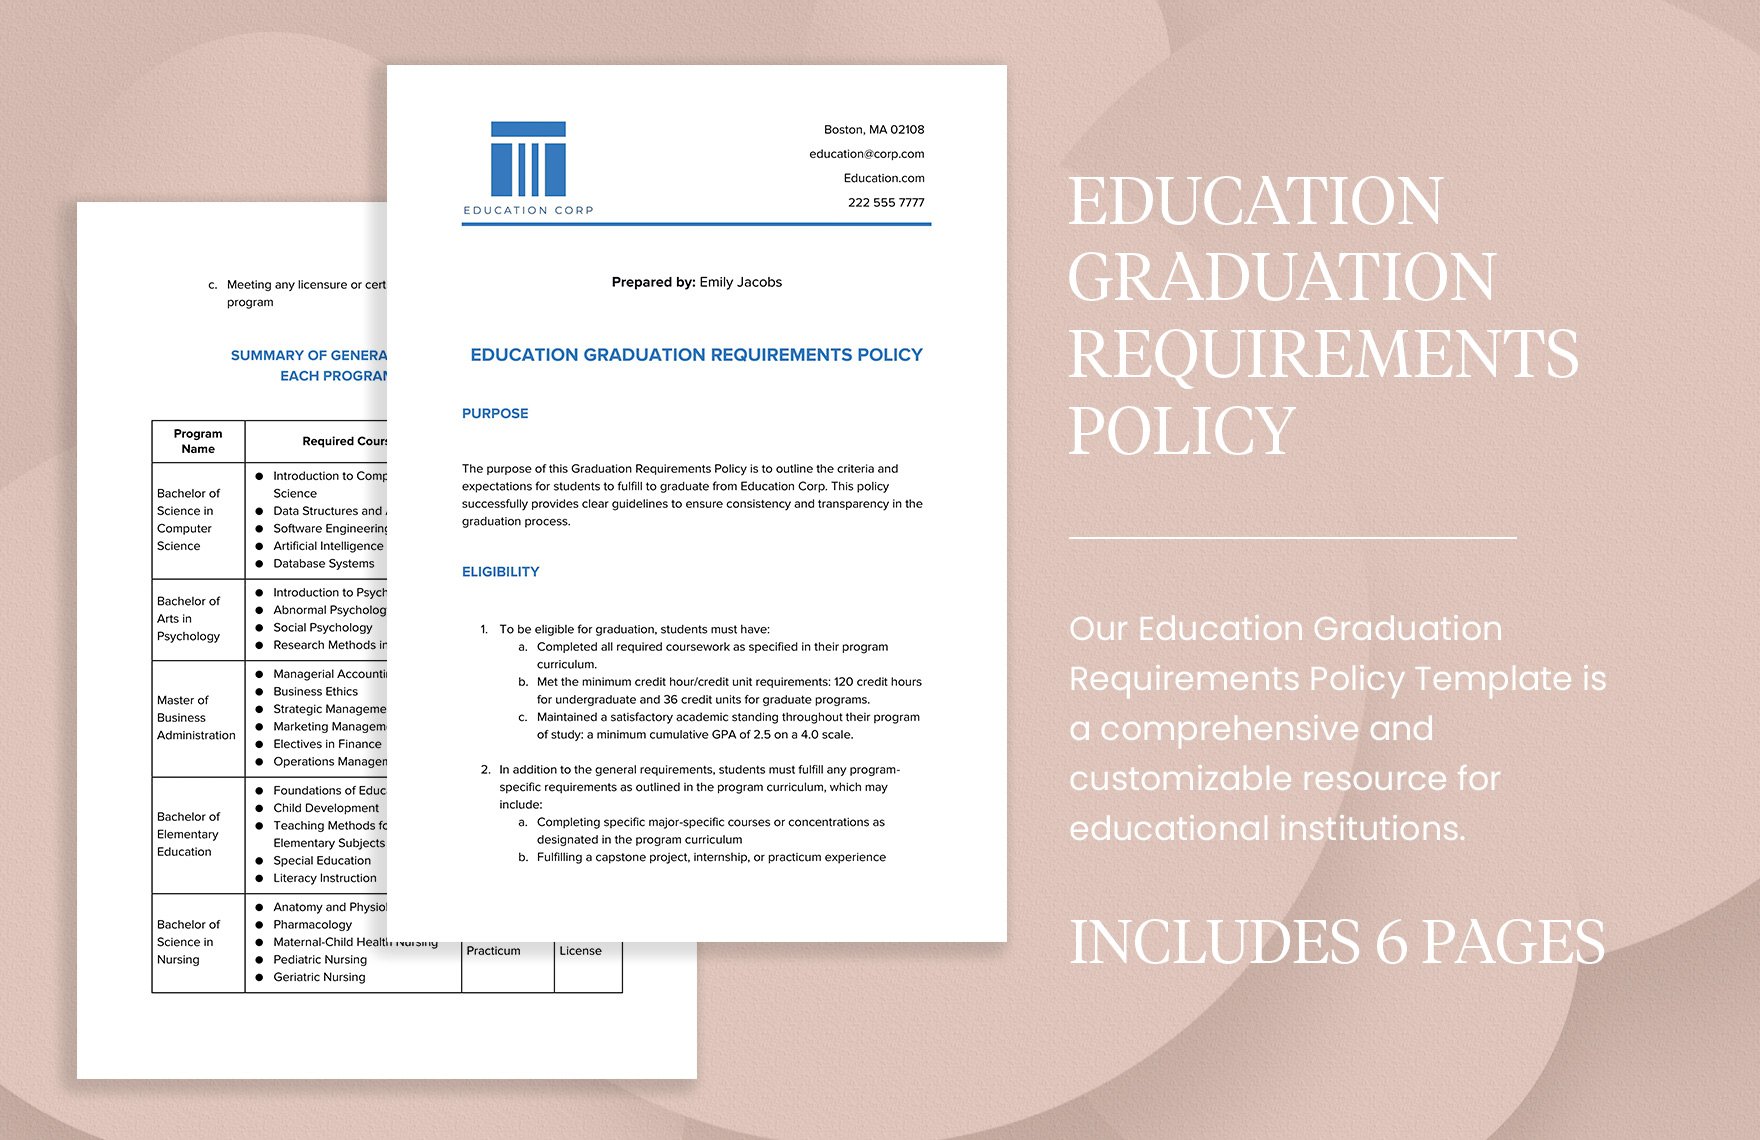 Education Graduation Requirements Policy